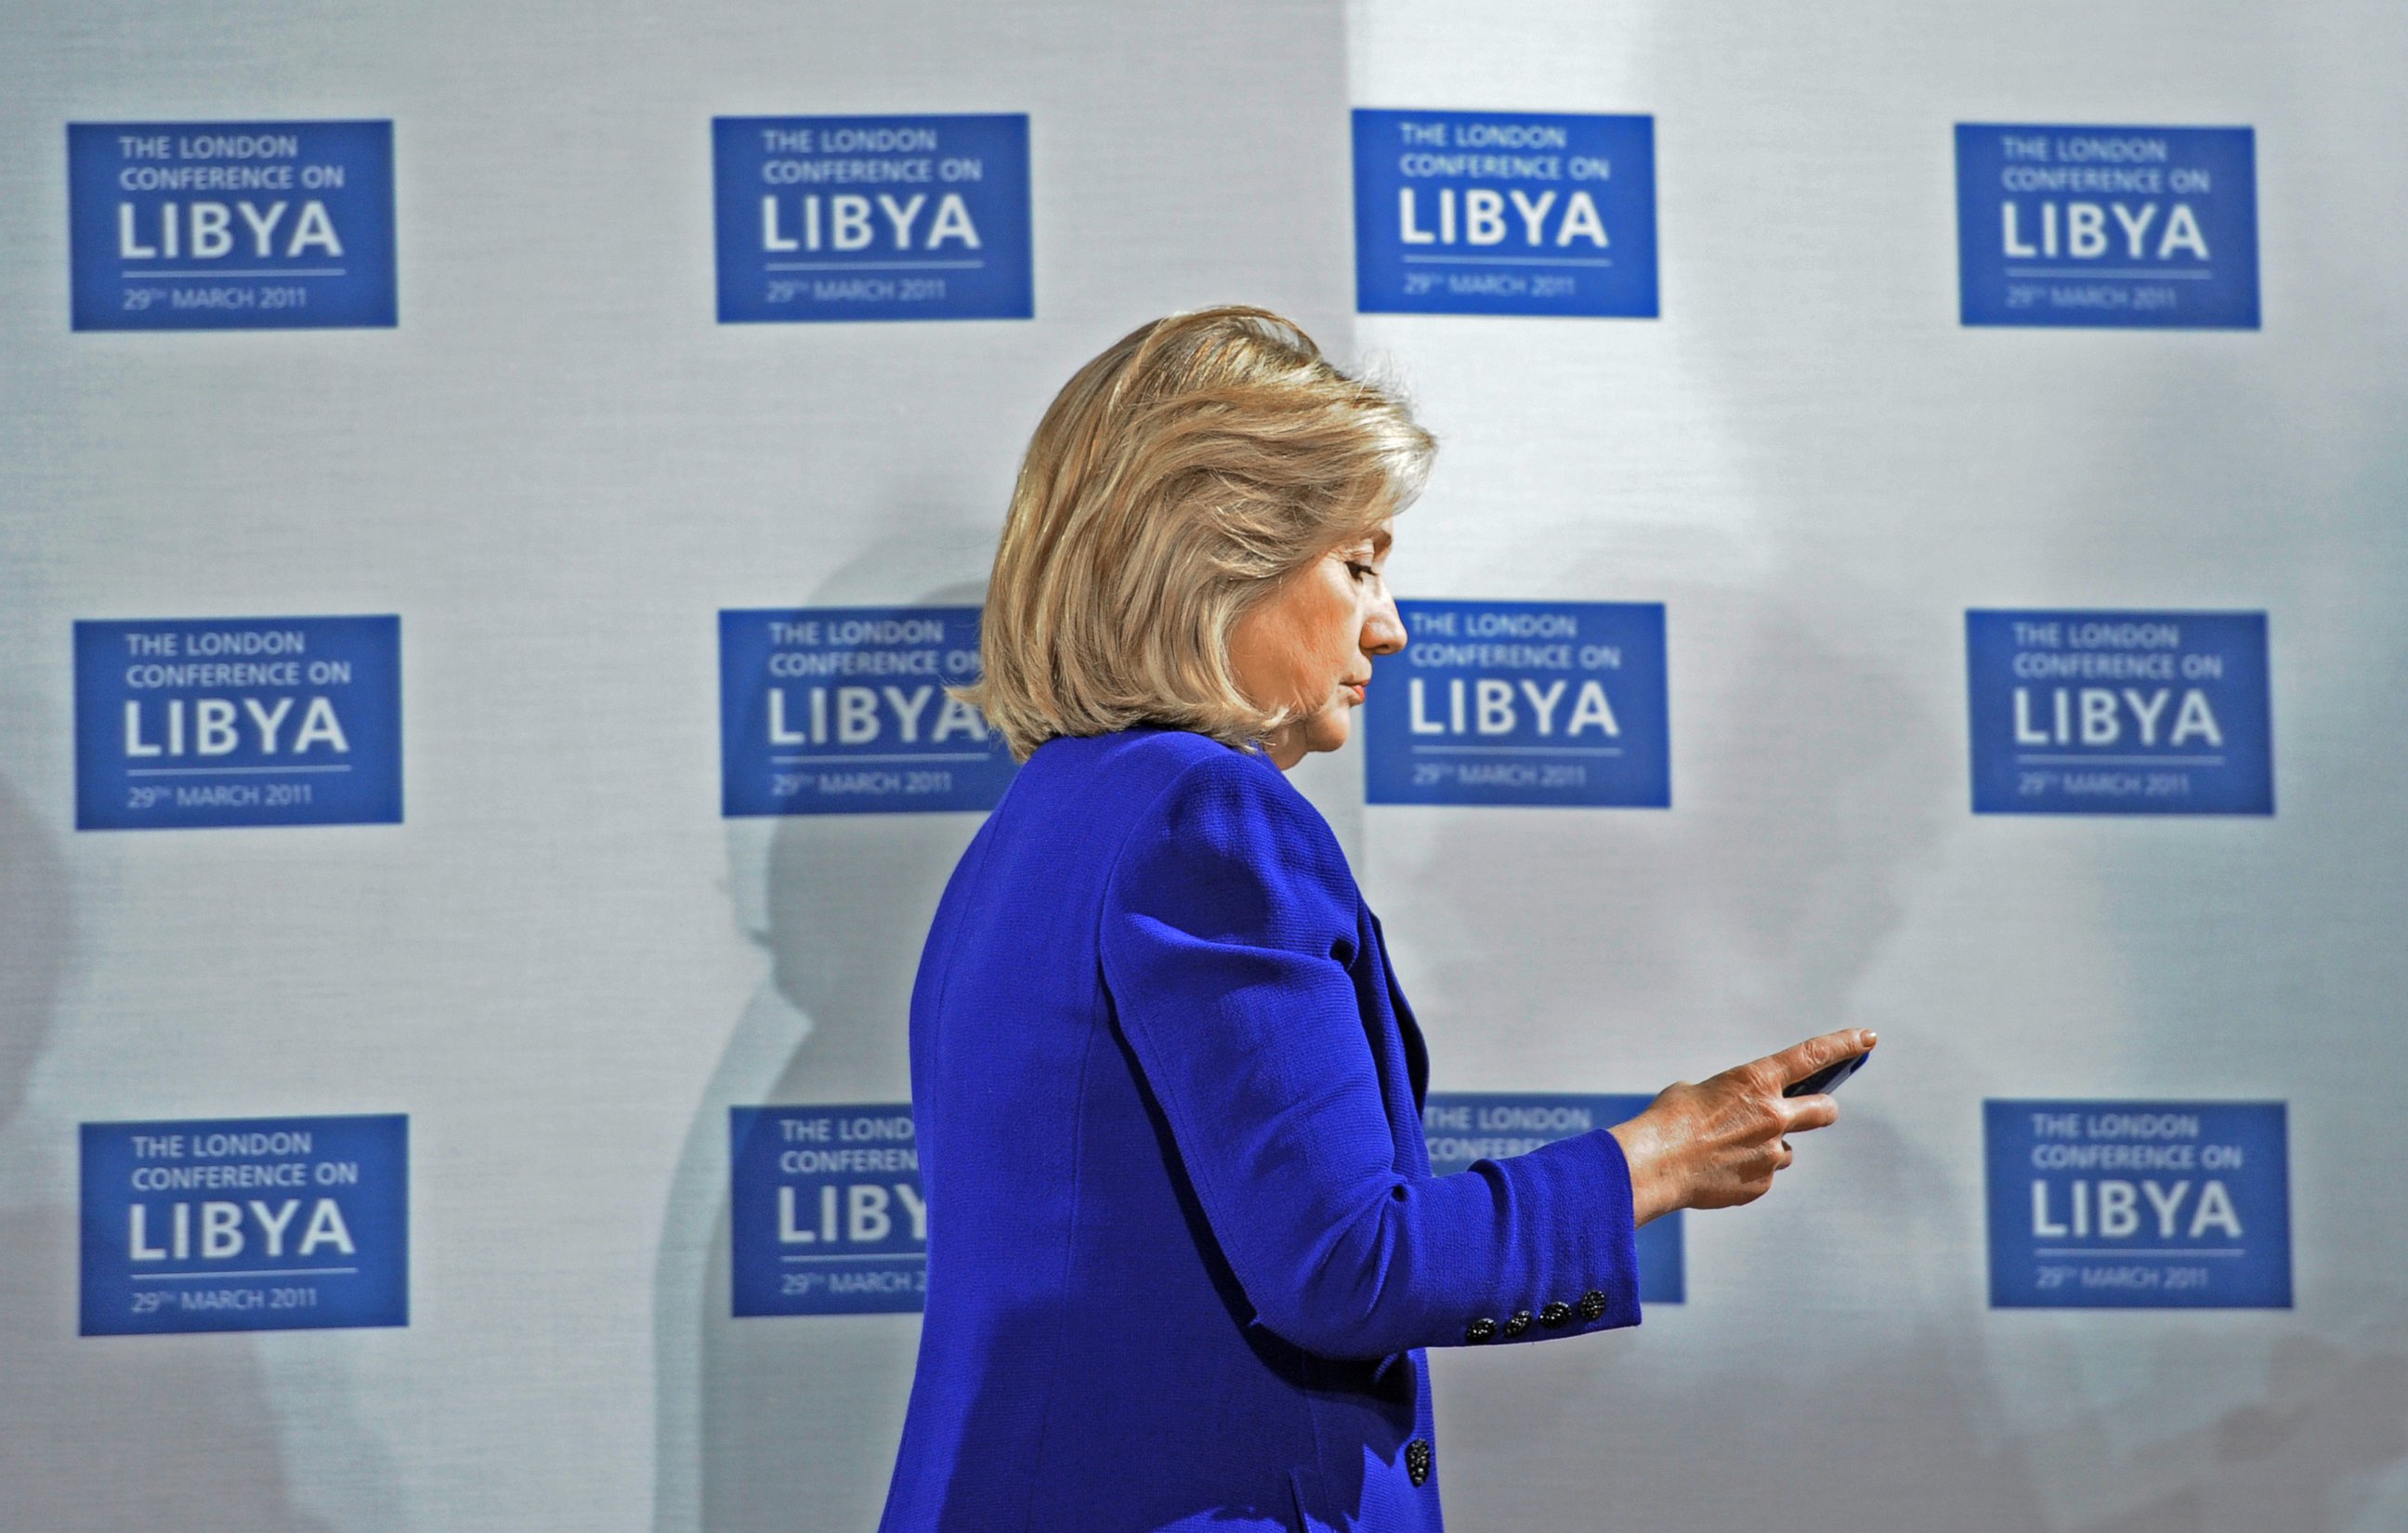 PHOTO: U.S. Secretary of State Hillary Clinton checks her phone at the opening of the Libyan Conference, a meeting of international allies to discuss the next steps for Libya, on March 29, 2011, in London.